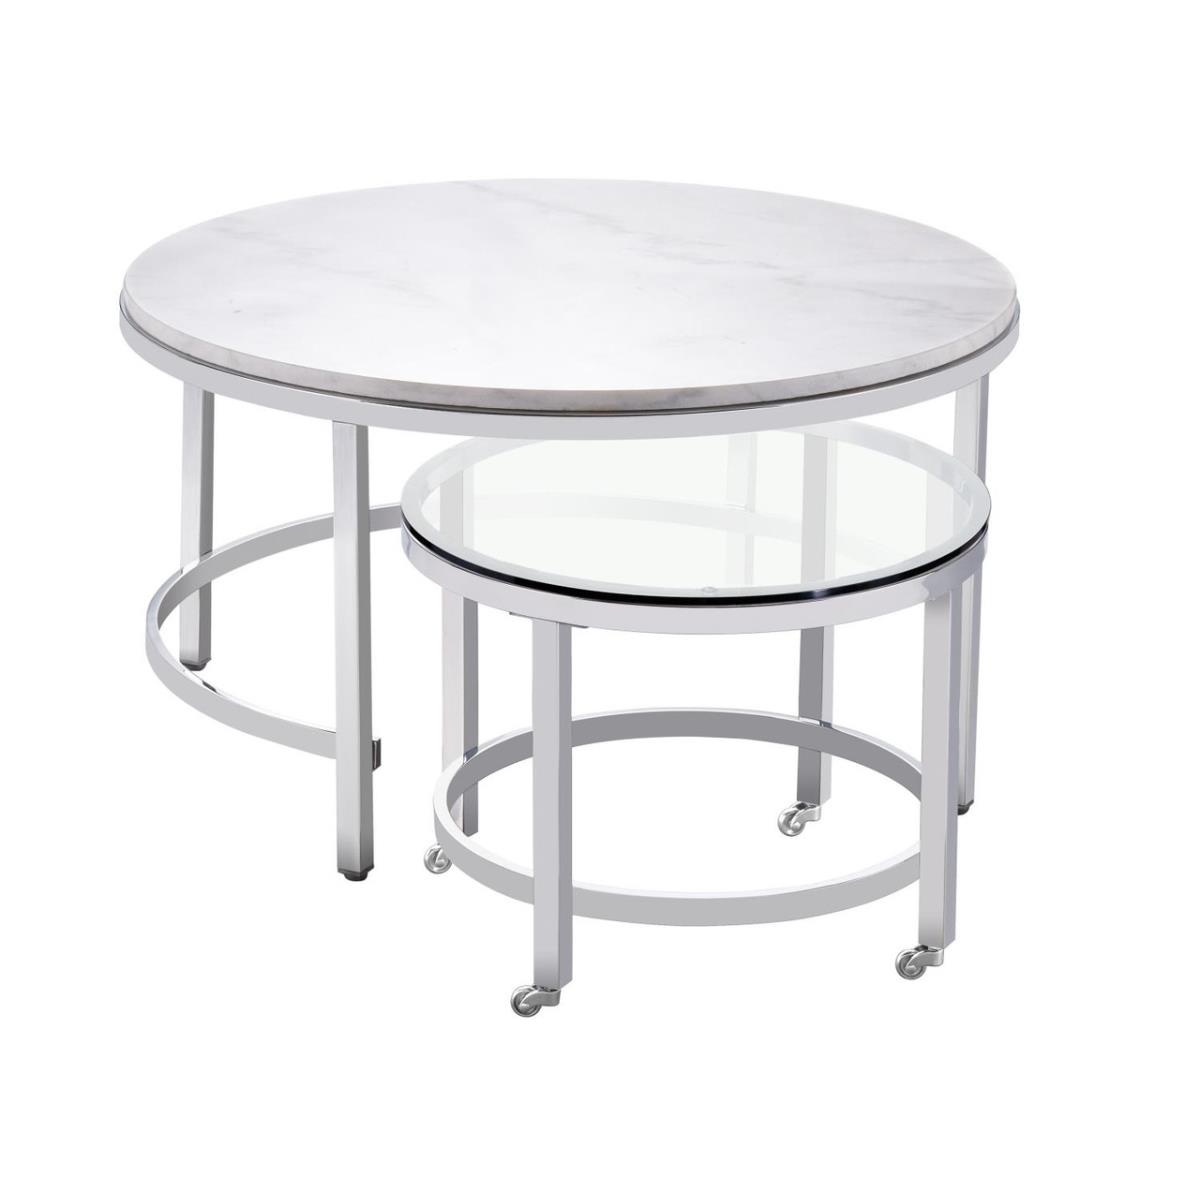 Picture of Bassett Mirror 3259-LR-121BEC Jadyn Round Base Cocktail Table, Polished Chrome